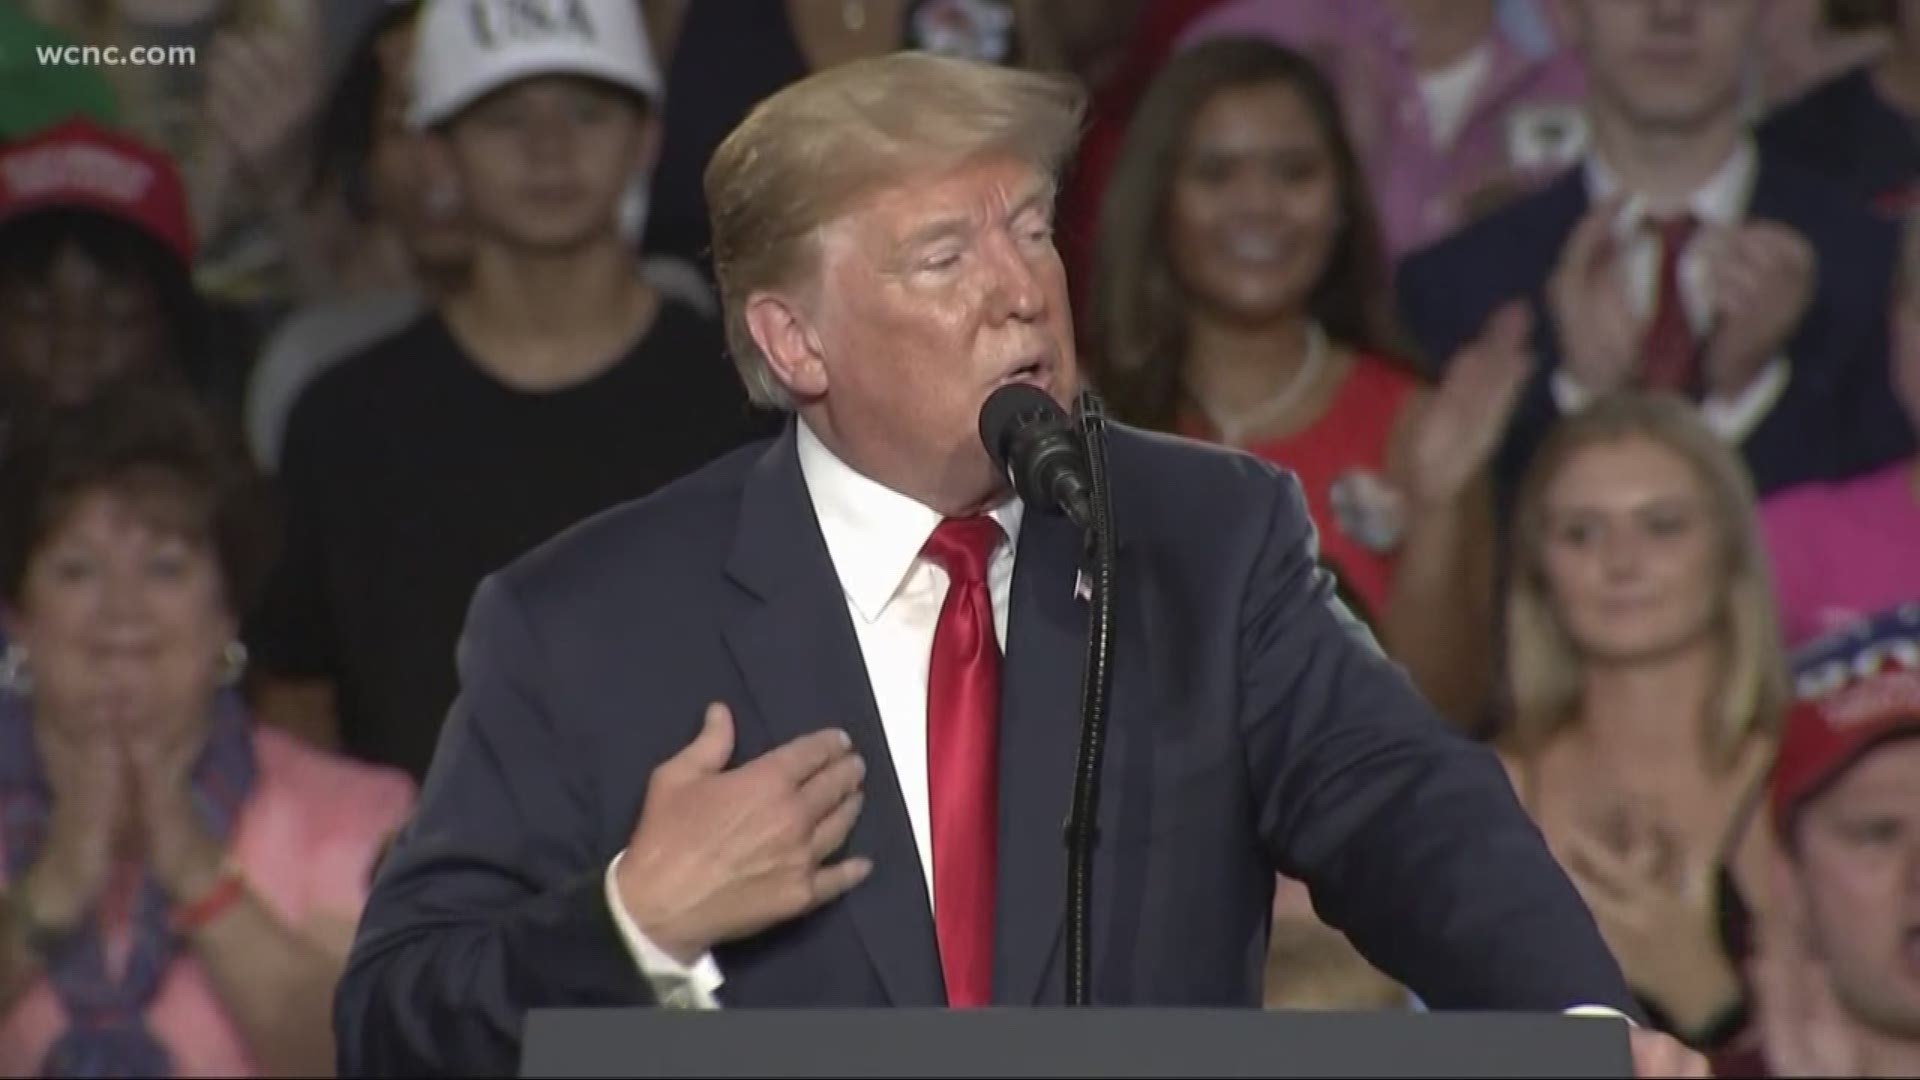 President Trump will return to the Queen City as part of his campaign to help drum up support for the midterm elections.